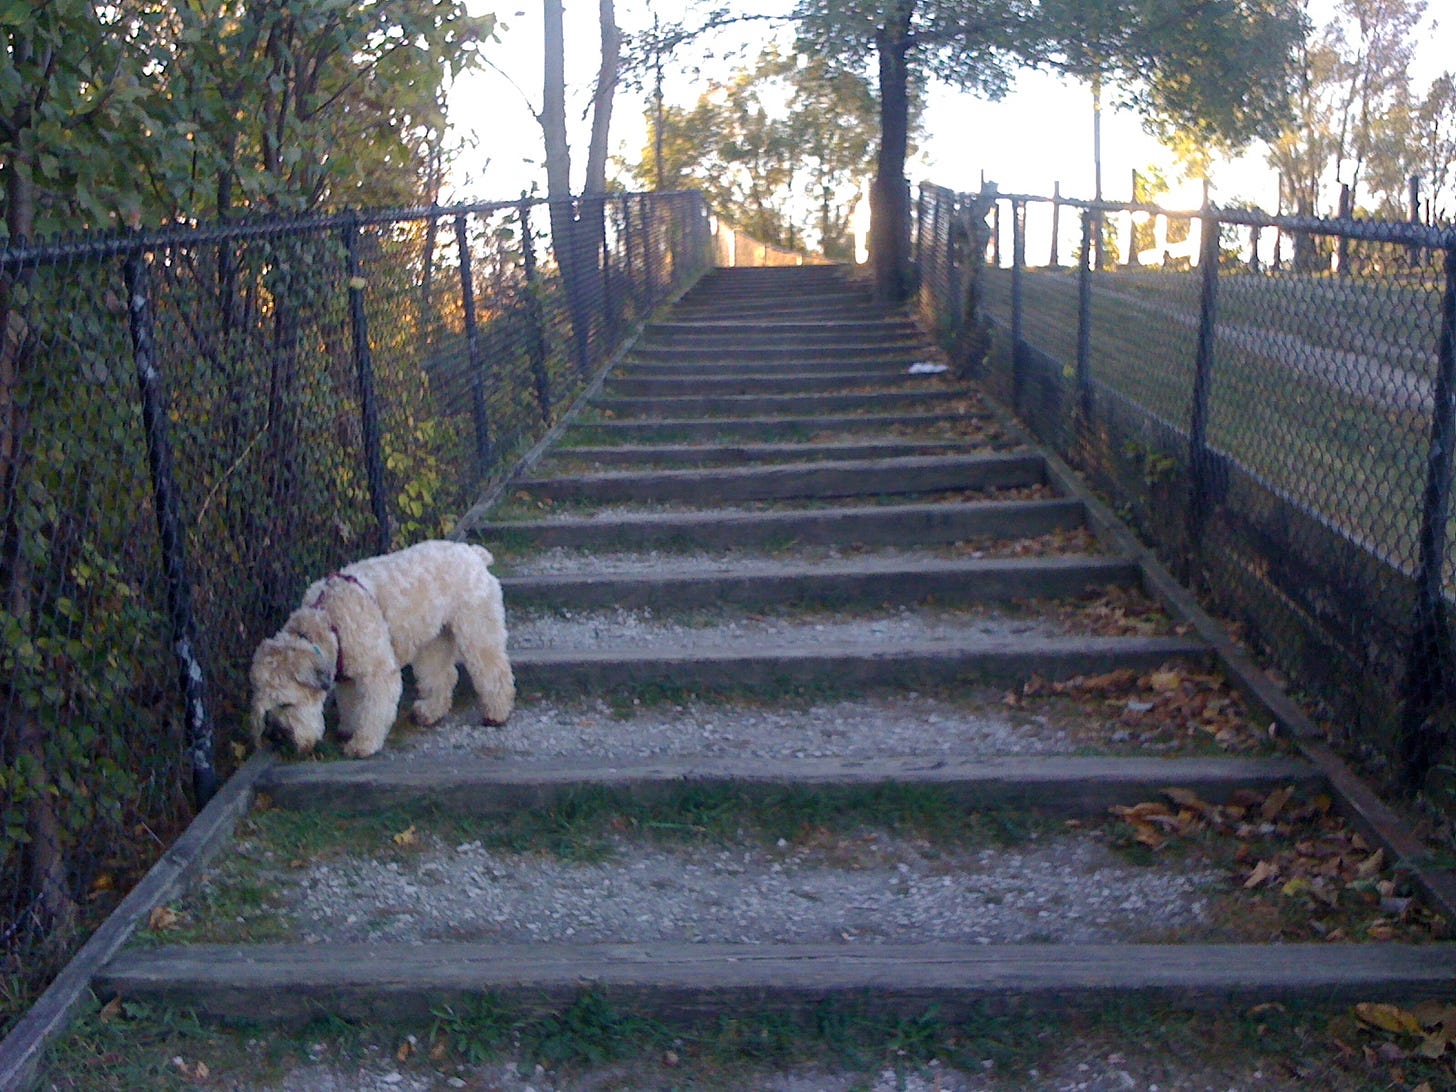 A soft-coated wheaten terrier sniffs at the edge of a long wood-and-gravel staircase hemmed in on either side by chain-link fences, running up a hill with trees on one side and a grassy hillside to the other.